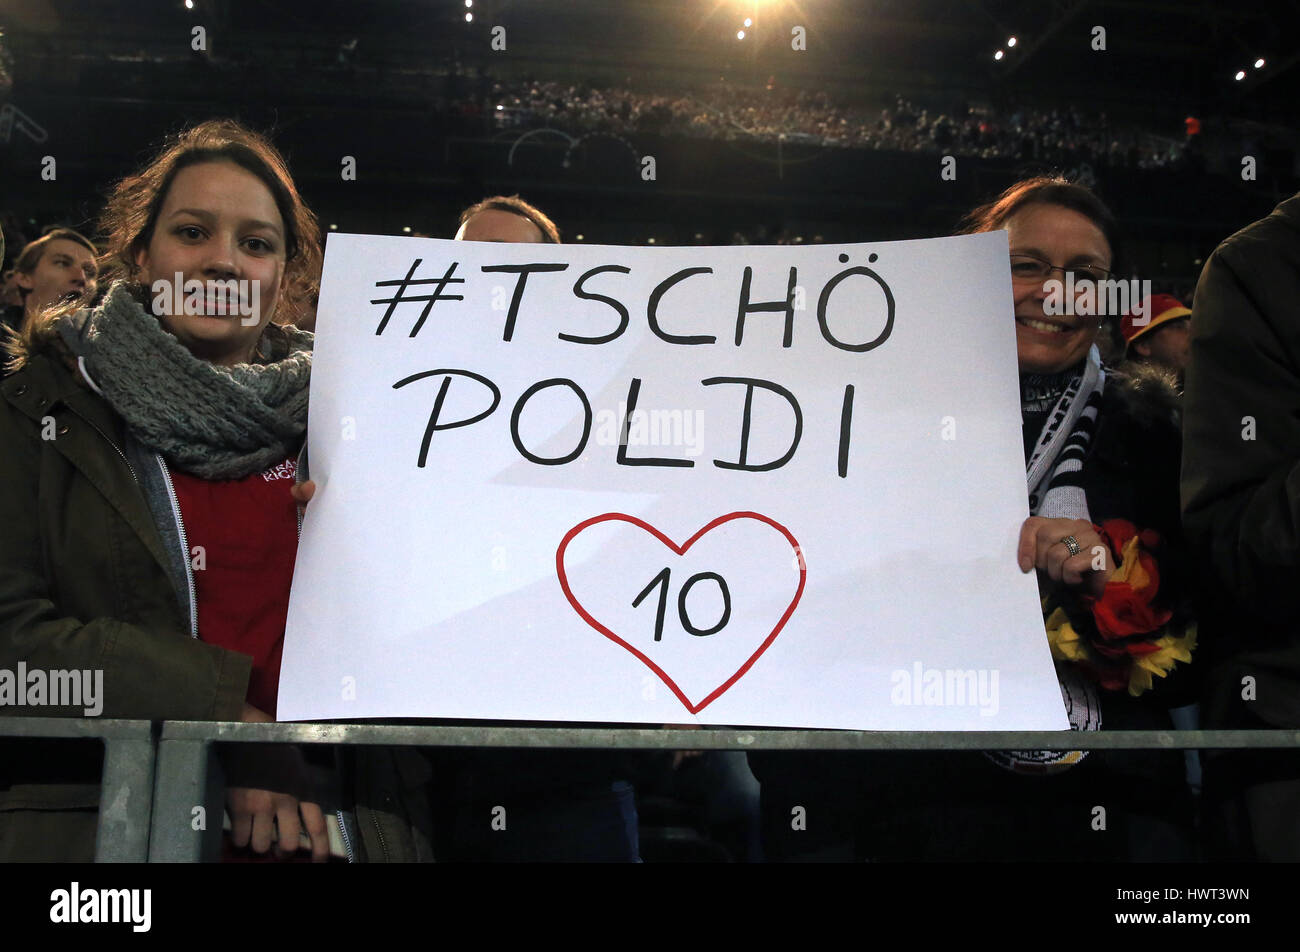 Germany fans hold banners in support of Lukas Podolski before the International Friendly match at Signal Iduna Park, Dortmund. Stock Photo